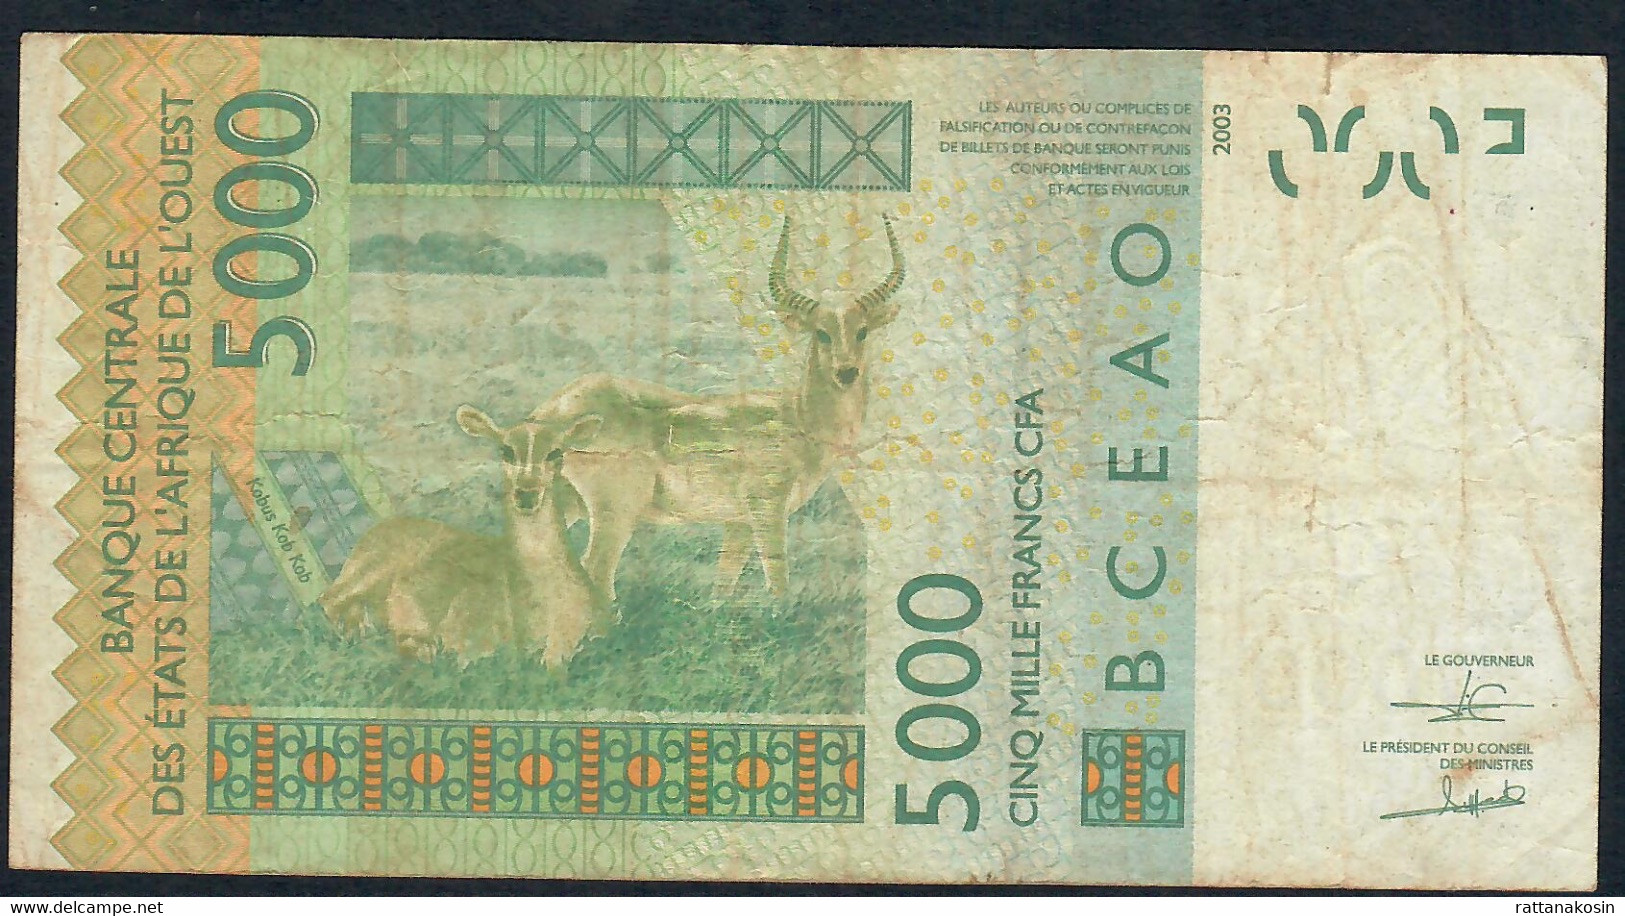 W.A.S. NIGER P617Hq 5000 FRANCS (20)17 Signature 43  AVF NO P.h. ! - West African States